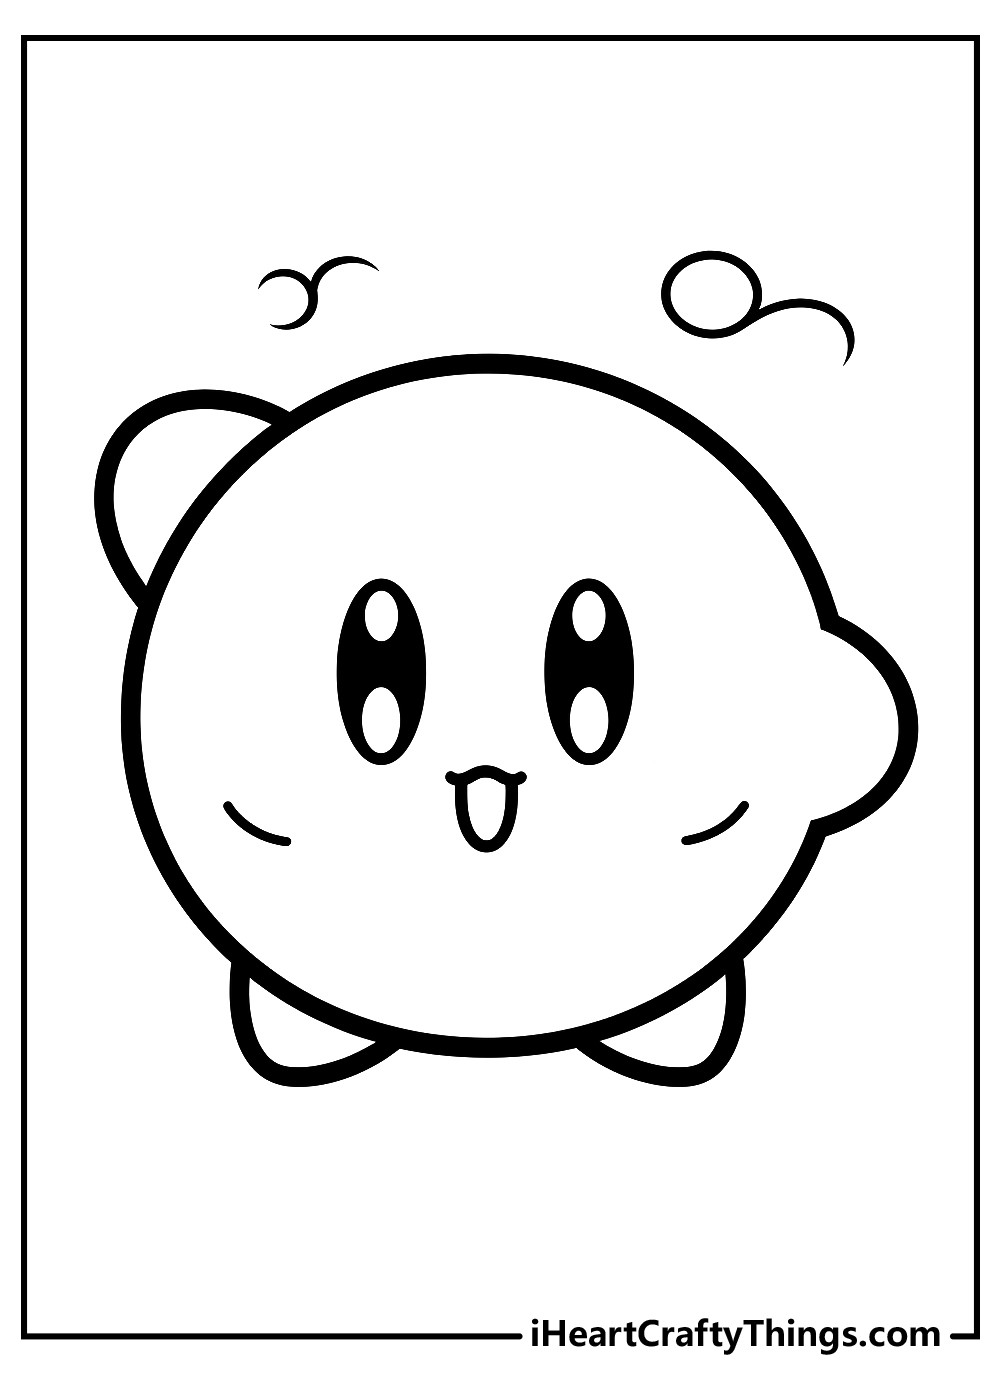 kirby coloring sheet for kids